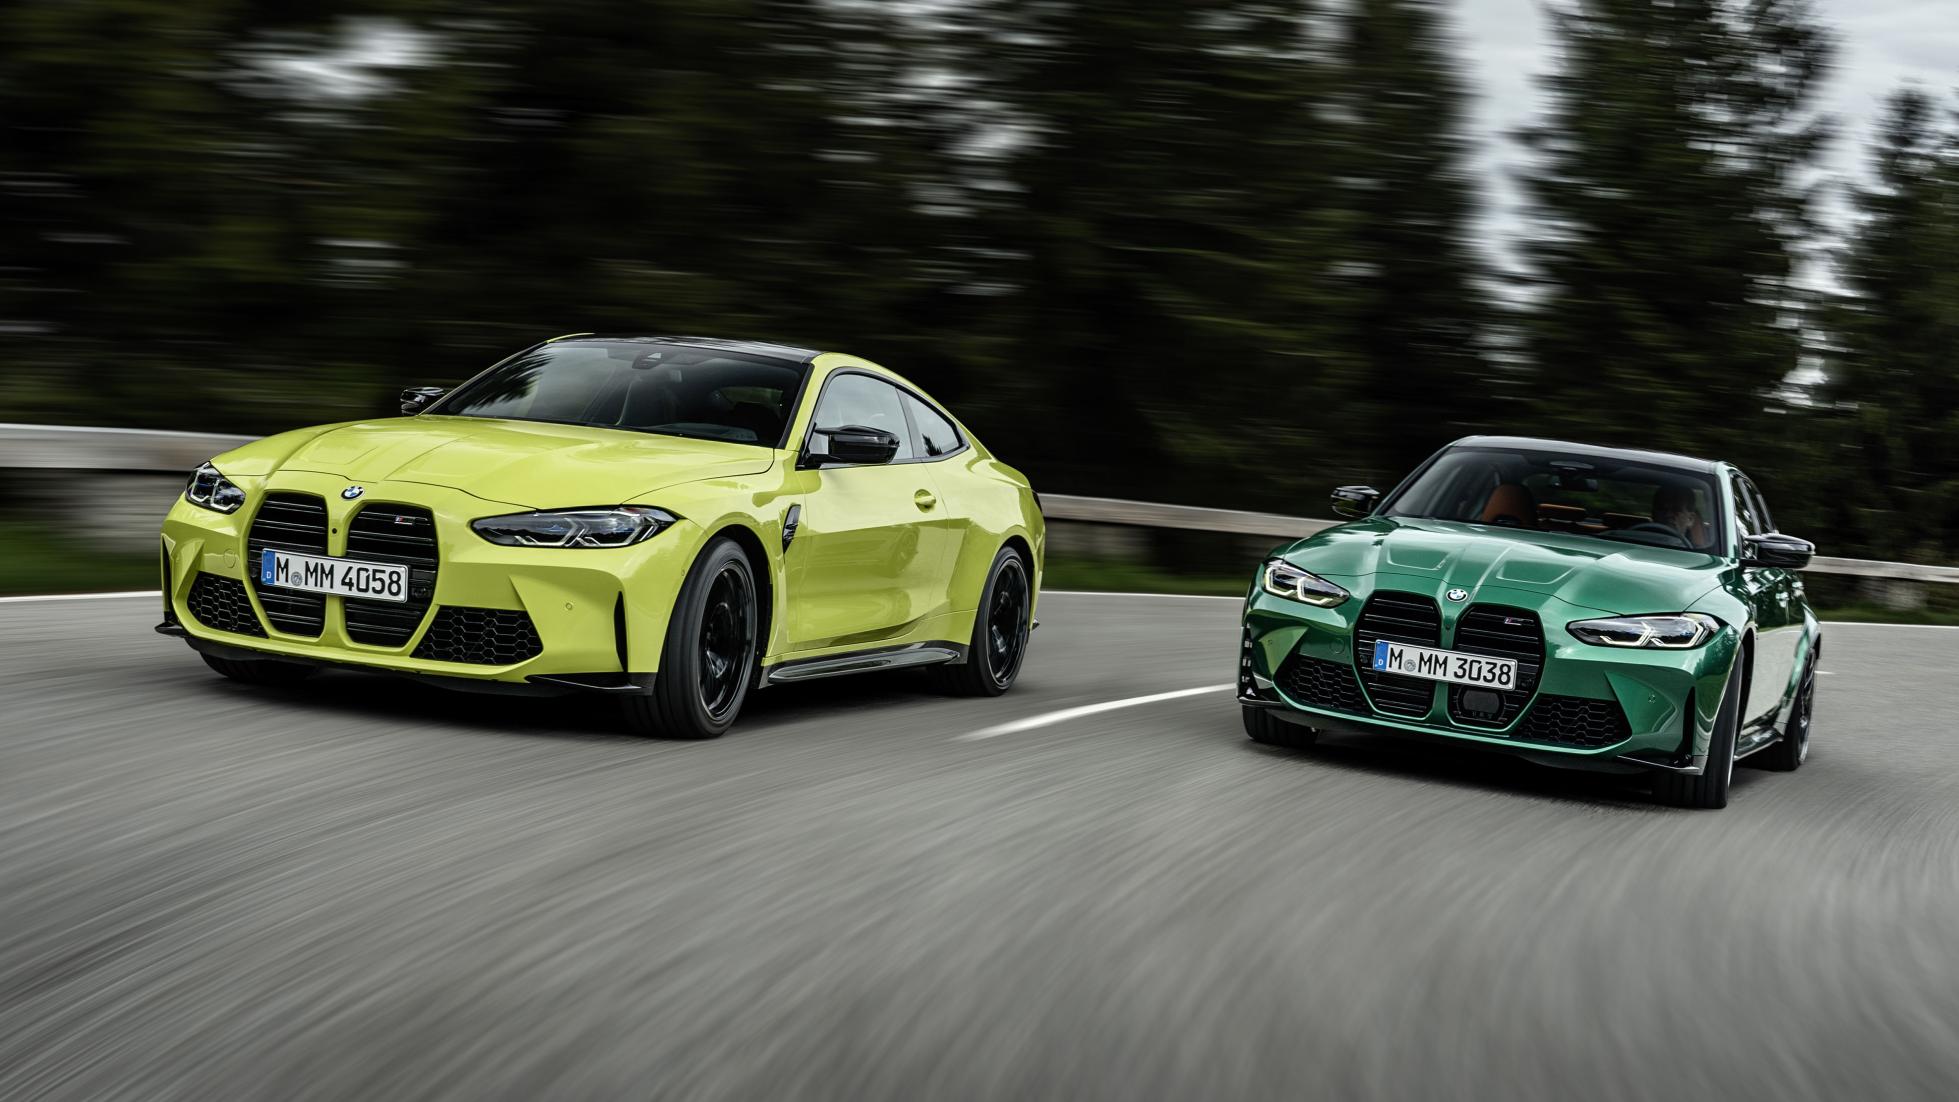 The new BMW M3 and BMW M4 have arrived